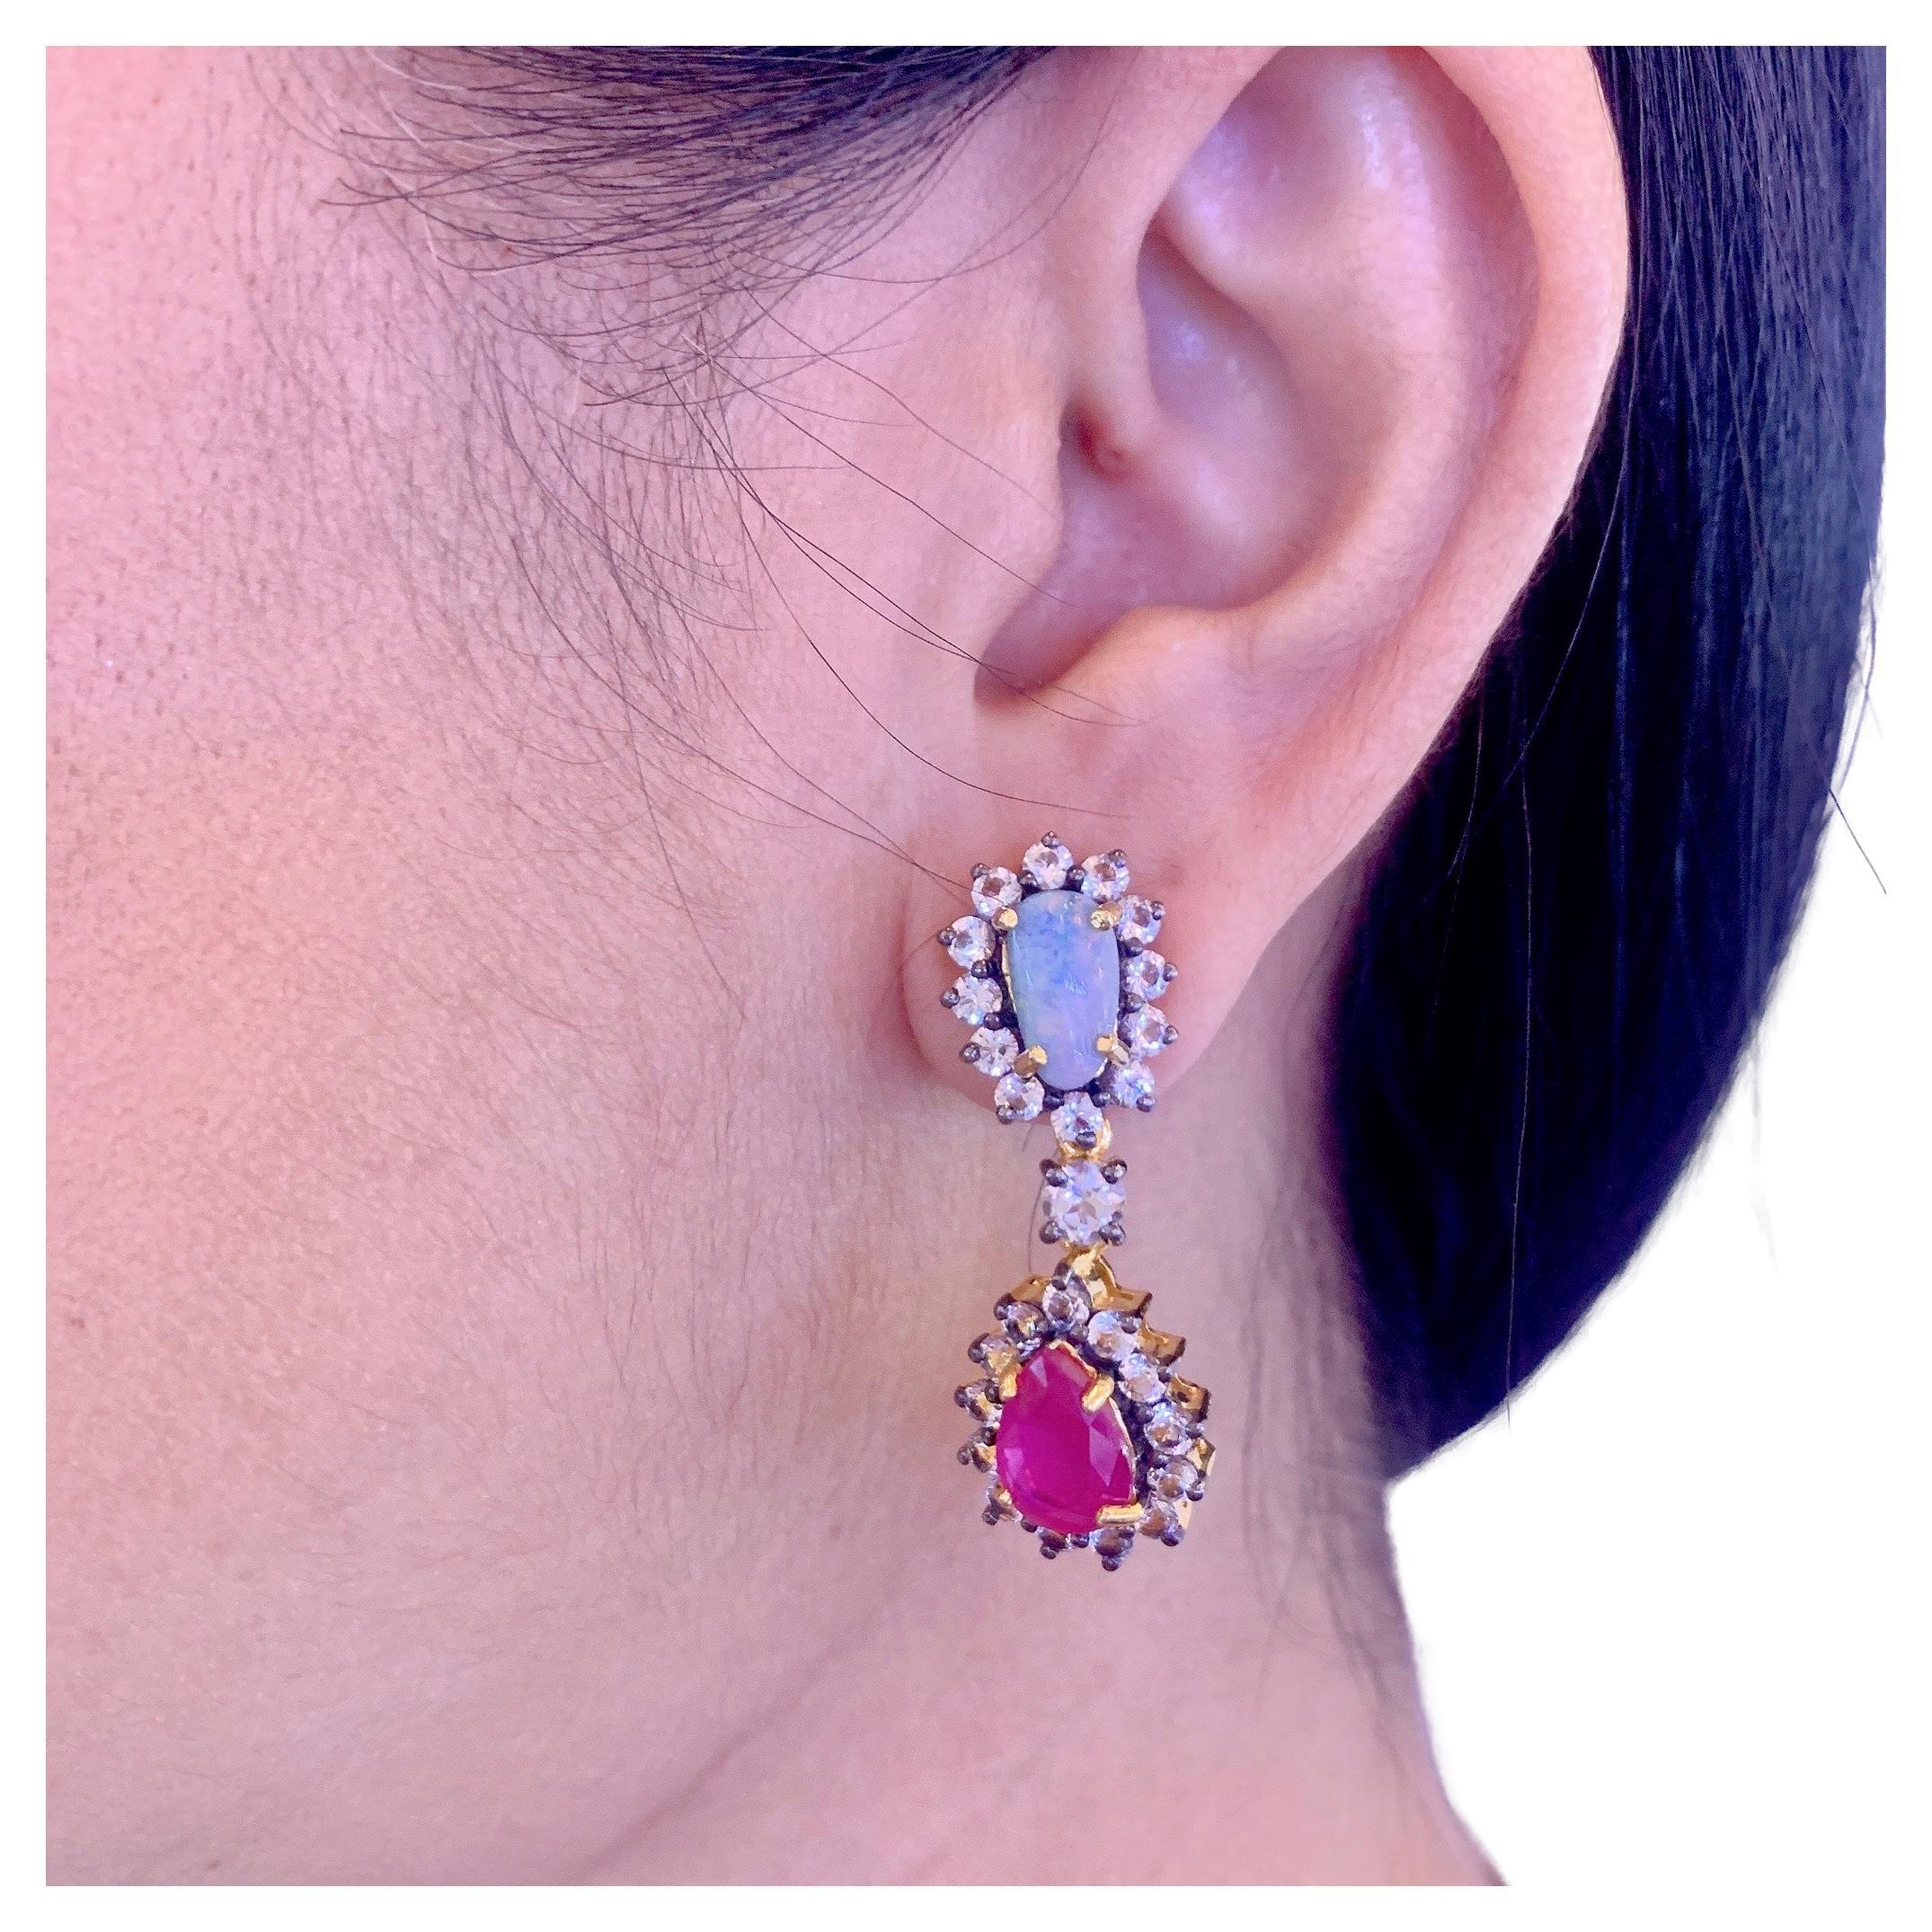 Opal. Ruby & White Topaz Candy Earrings, Silver & 22k Pink Gold
Natural Opal 
6 carats 
Color white, blue, silver 
Natural Ruby 
Shape - pear shape 
12 carats 
White Topaz 
Shape - round brilliant 
9 carats 
22K Pink Gold and Silver 
This earrings